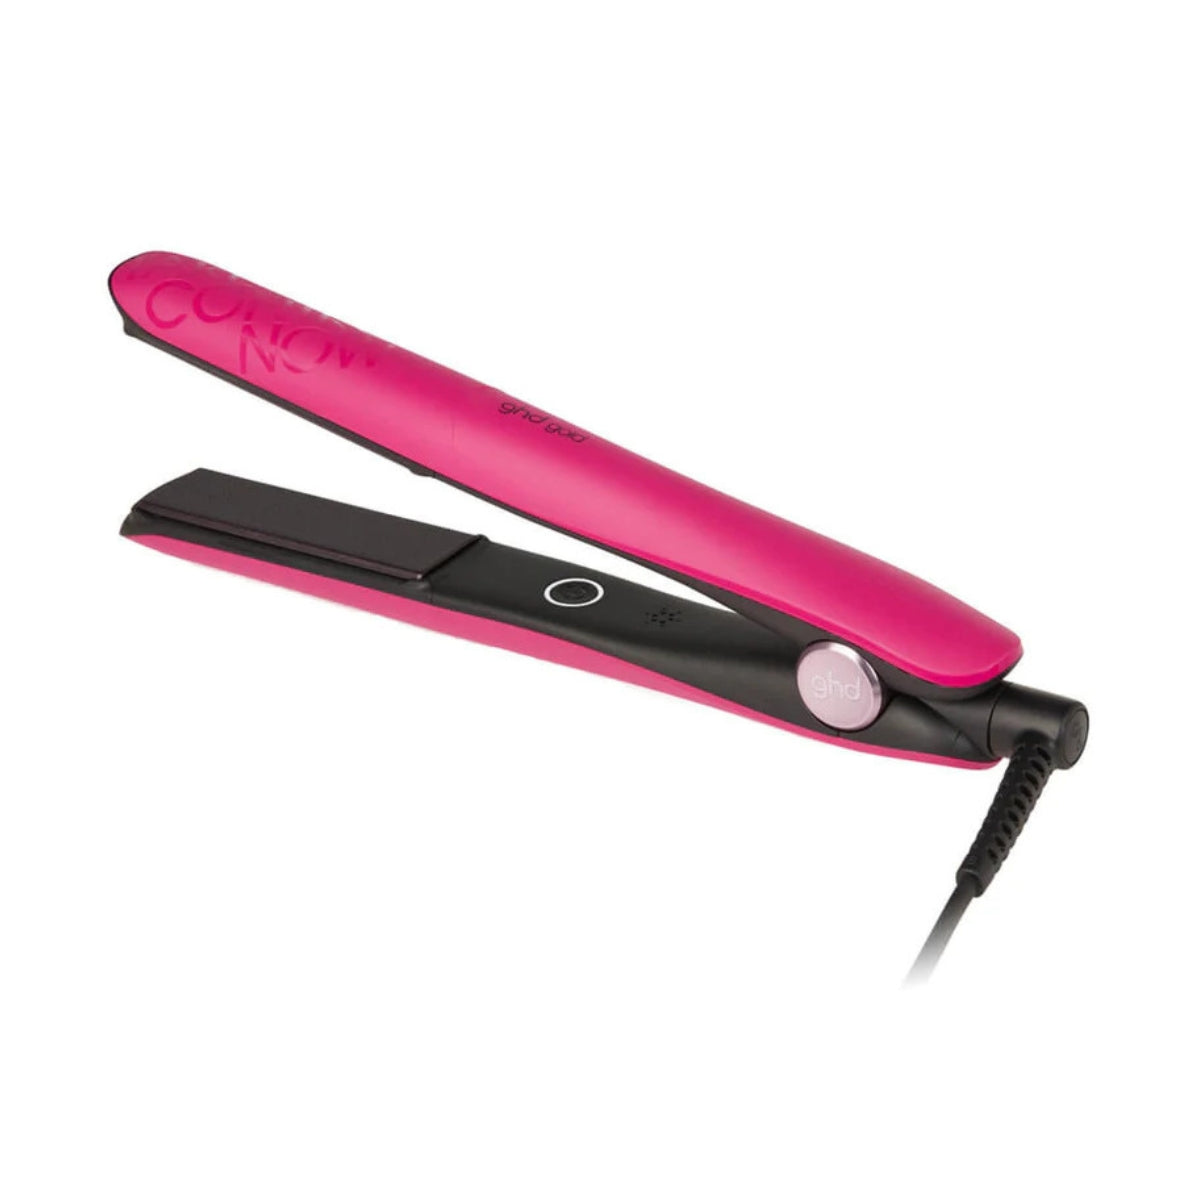 Ghd Gold Limited Edition Hair Straightener in Orchid Pink